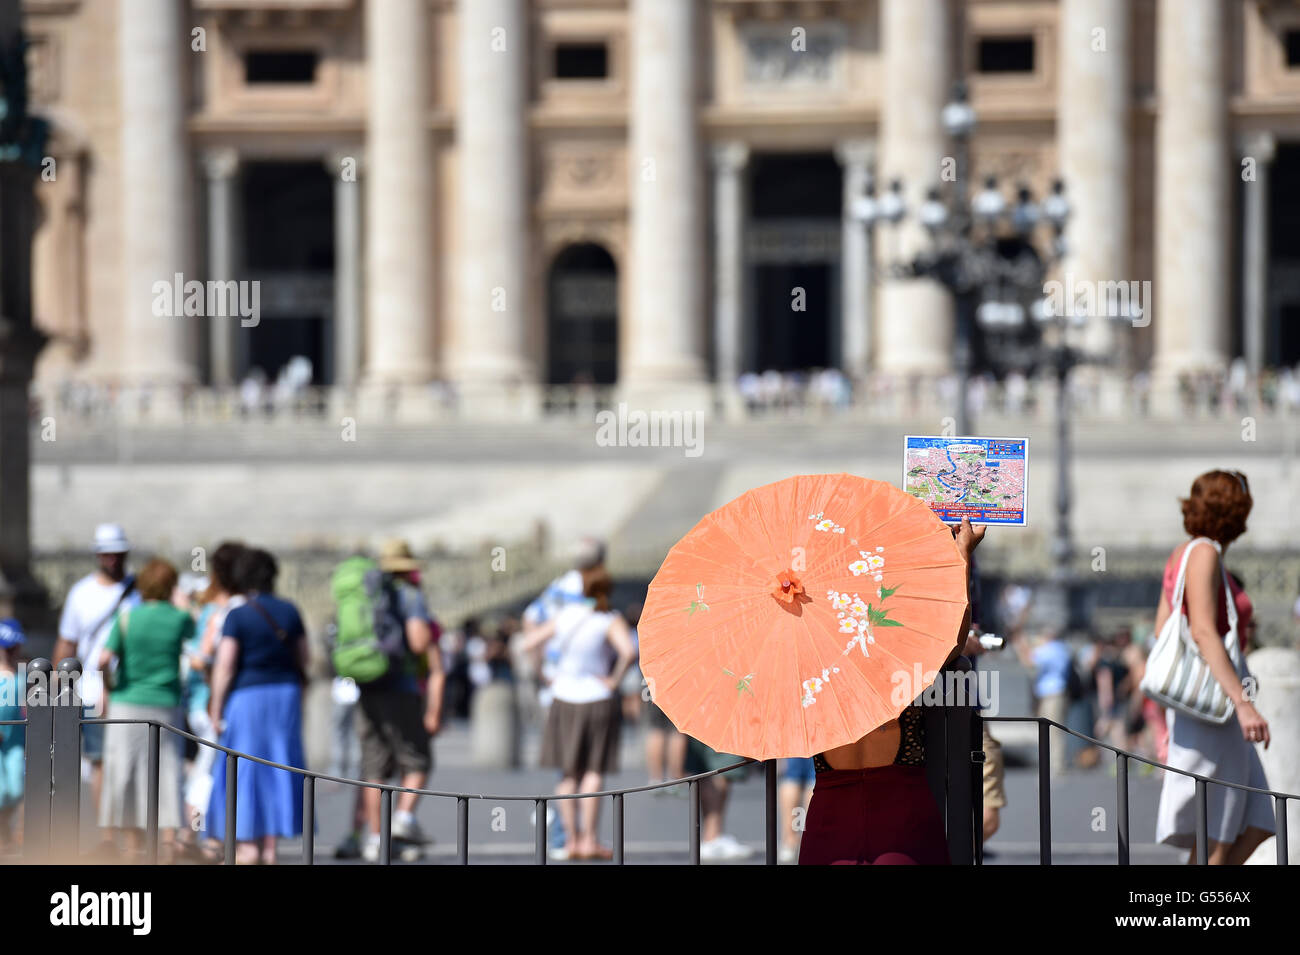 Japanese tourist guide with orange umbrella and guide book outside Saint Peters Vatican City Rome Stock Photo